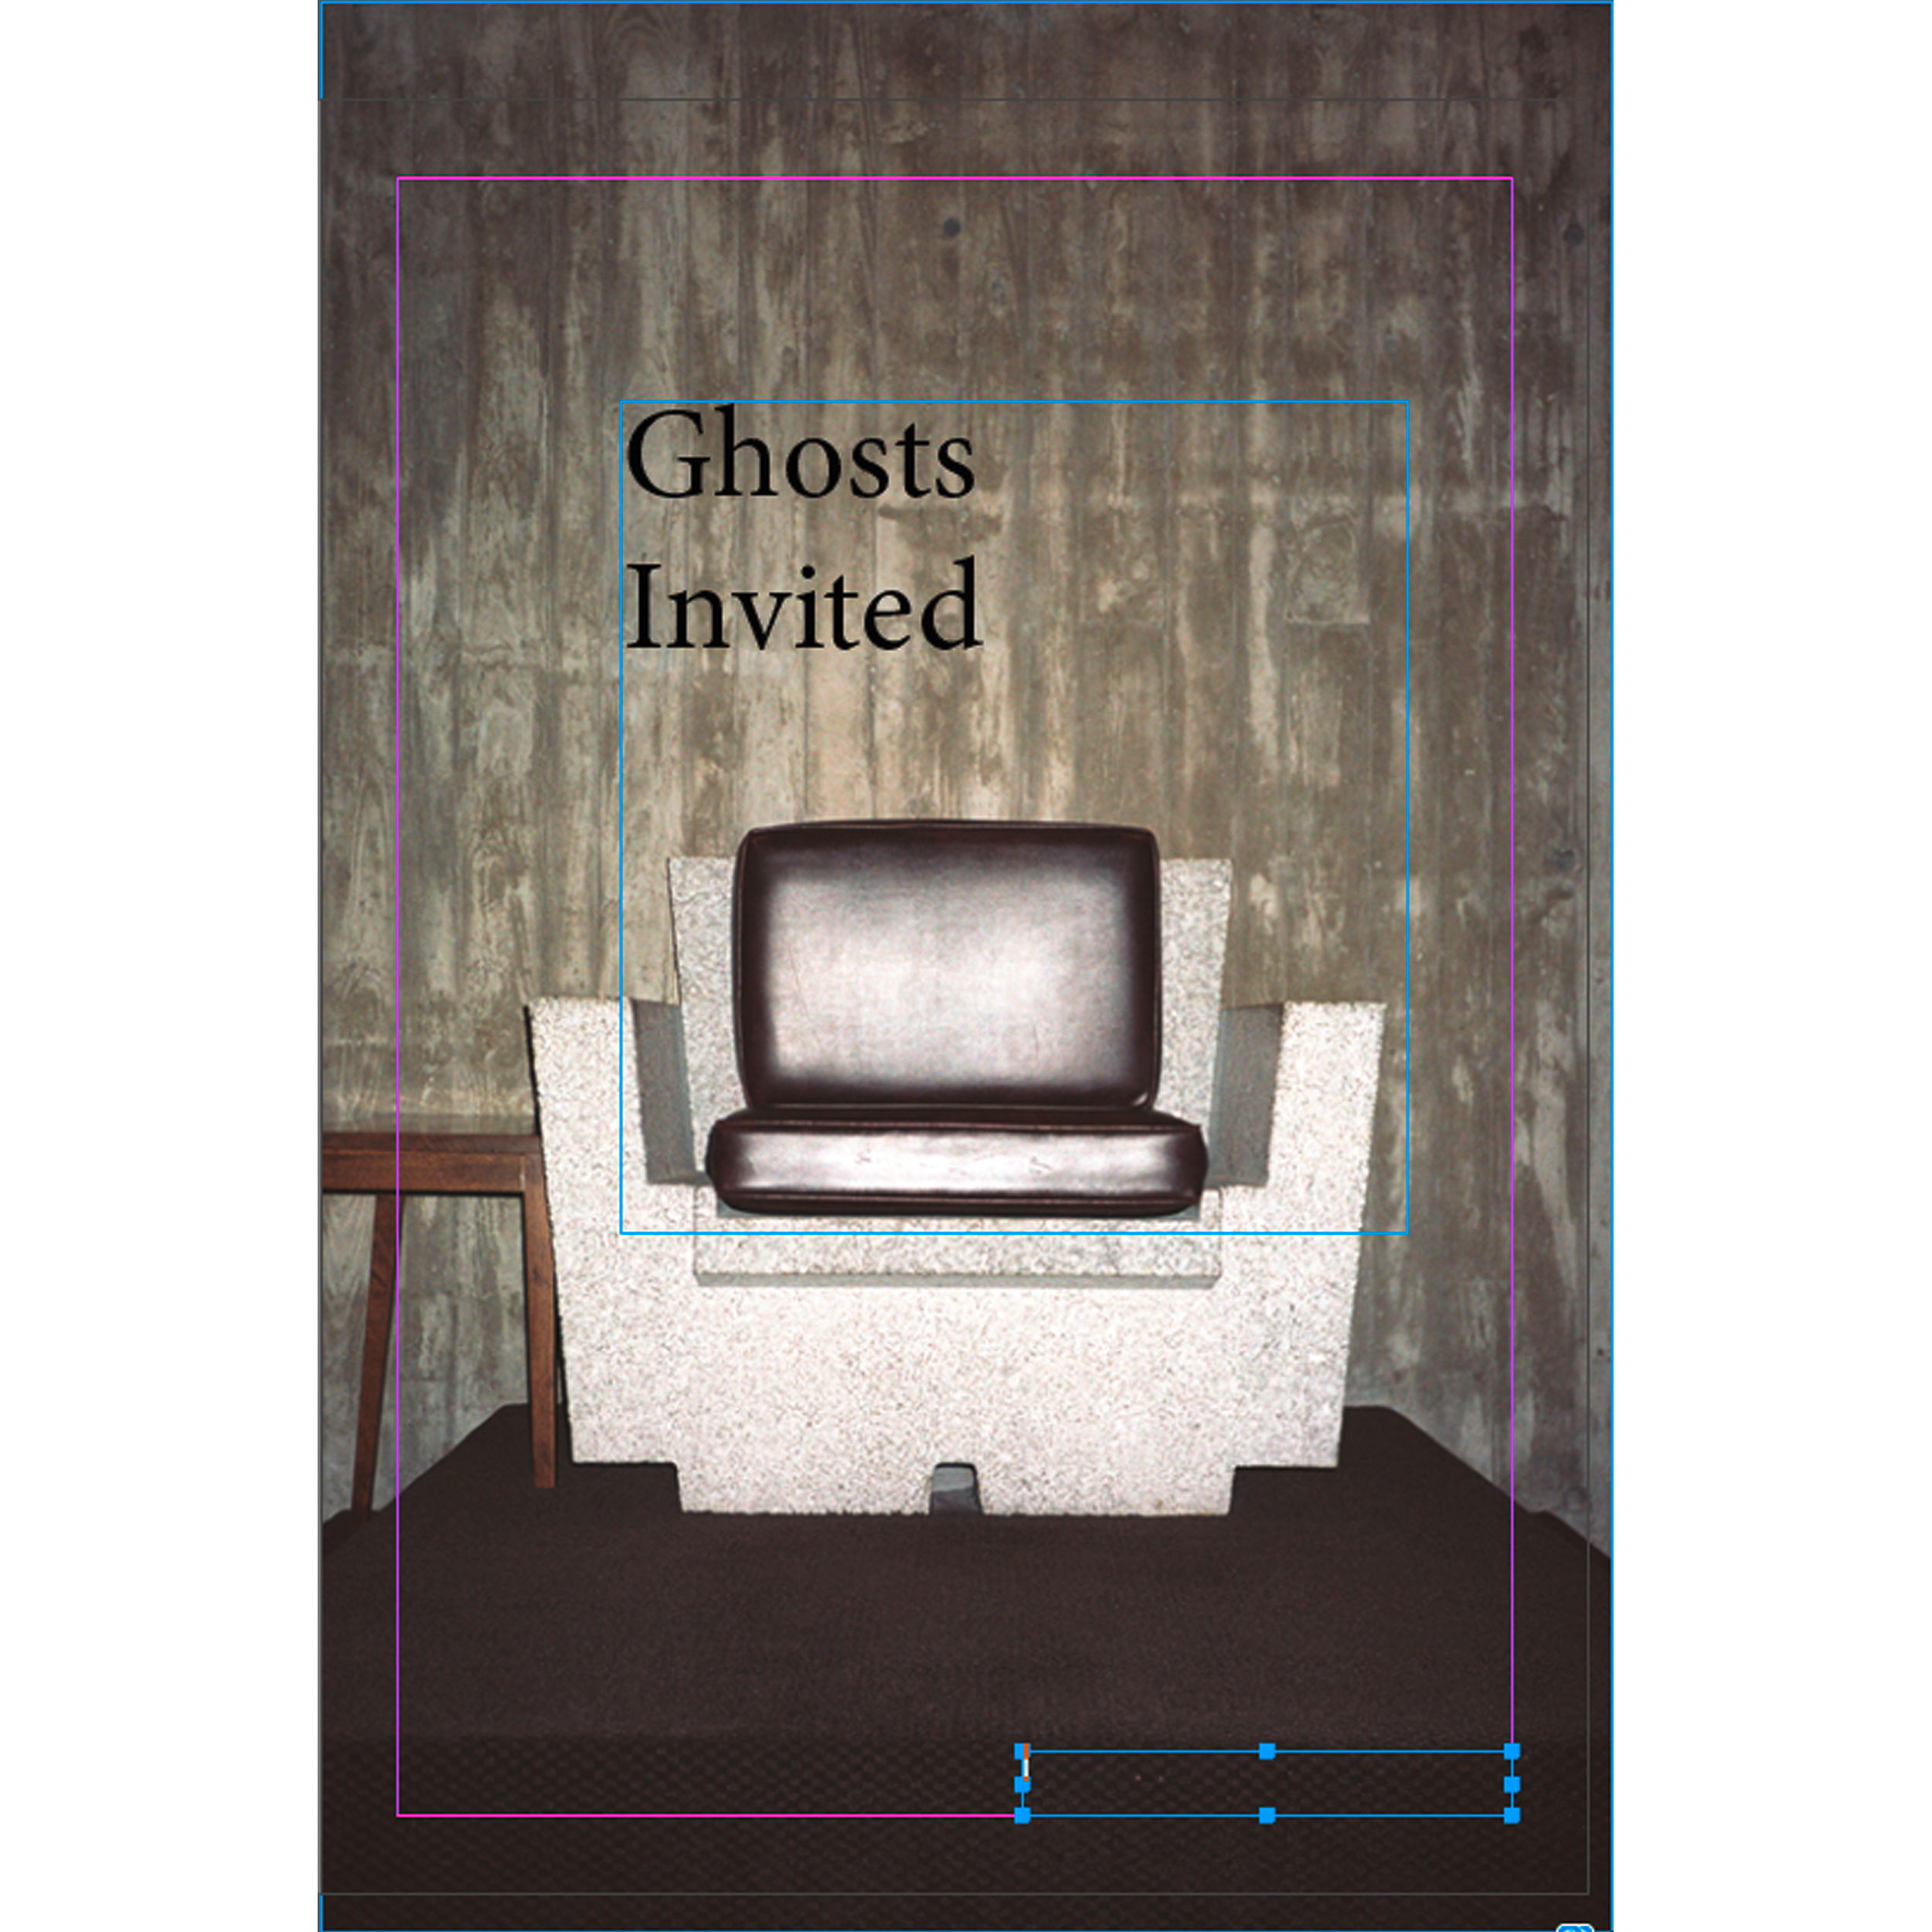 Ghosts invited